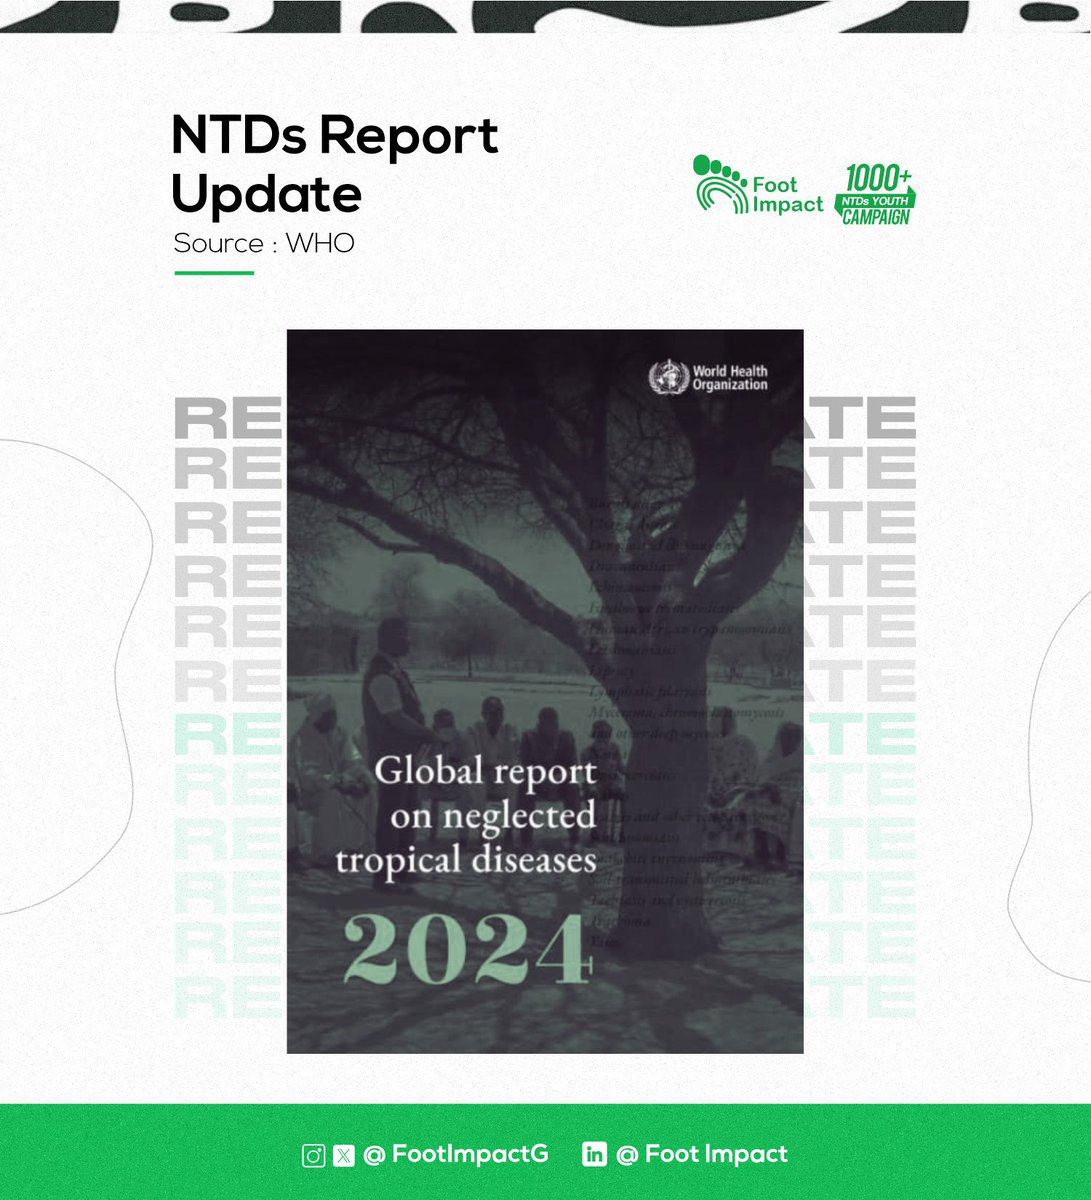 Global report on Neglected Tropical Diseases (#NTDs) 2024 - Stronger together, towards 2030 Read... linkedin.com/posts/footimpa… Source: World Health Organisation @WHO lnkd.in/e9bEHZ6i #EndNTDs #BeatNTDsNaija #BeatNTDs #100percentcommitted #youthcombatingNTDs #leavenoonebehind